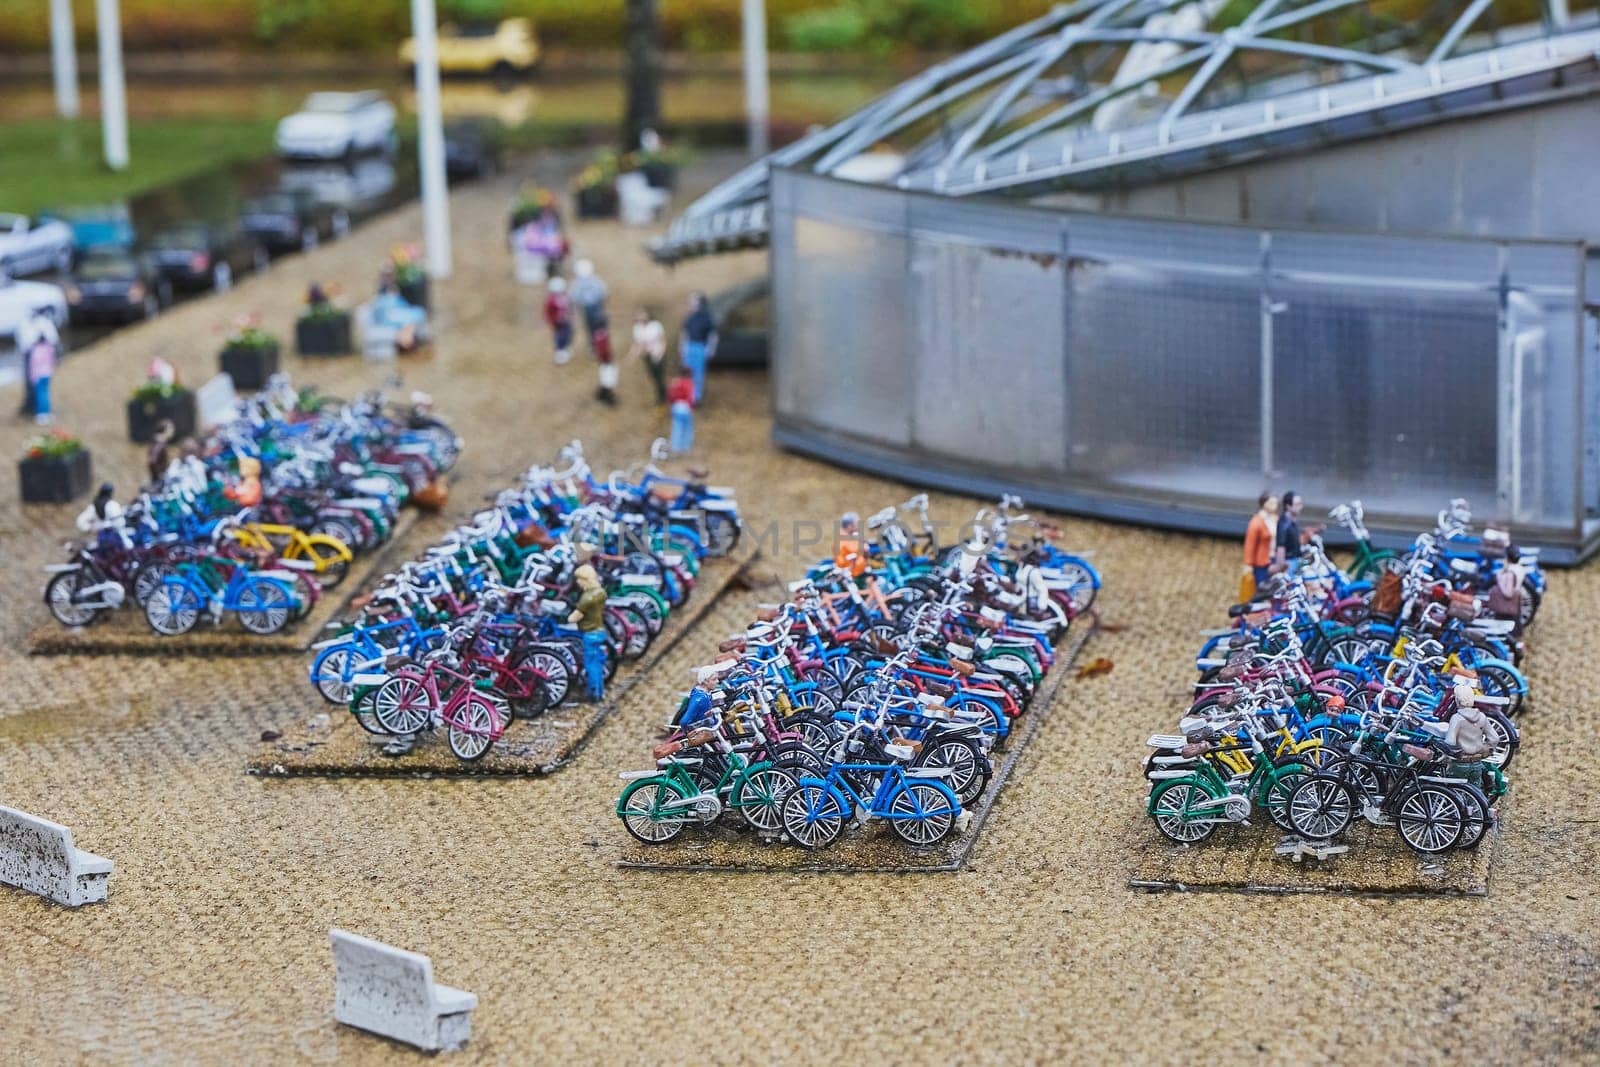 Miniature public bicycle parking in an amusement park in the Netherlands